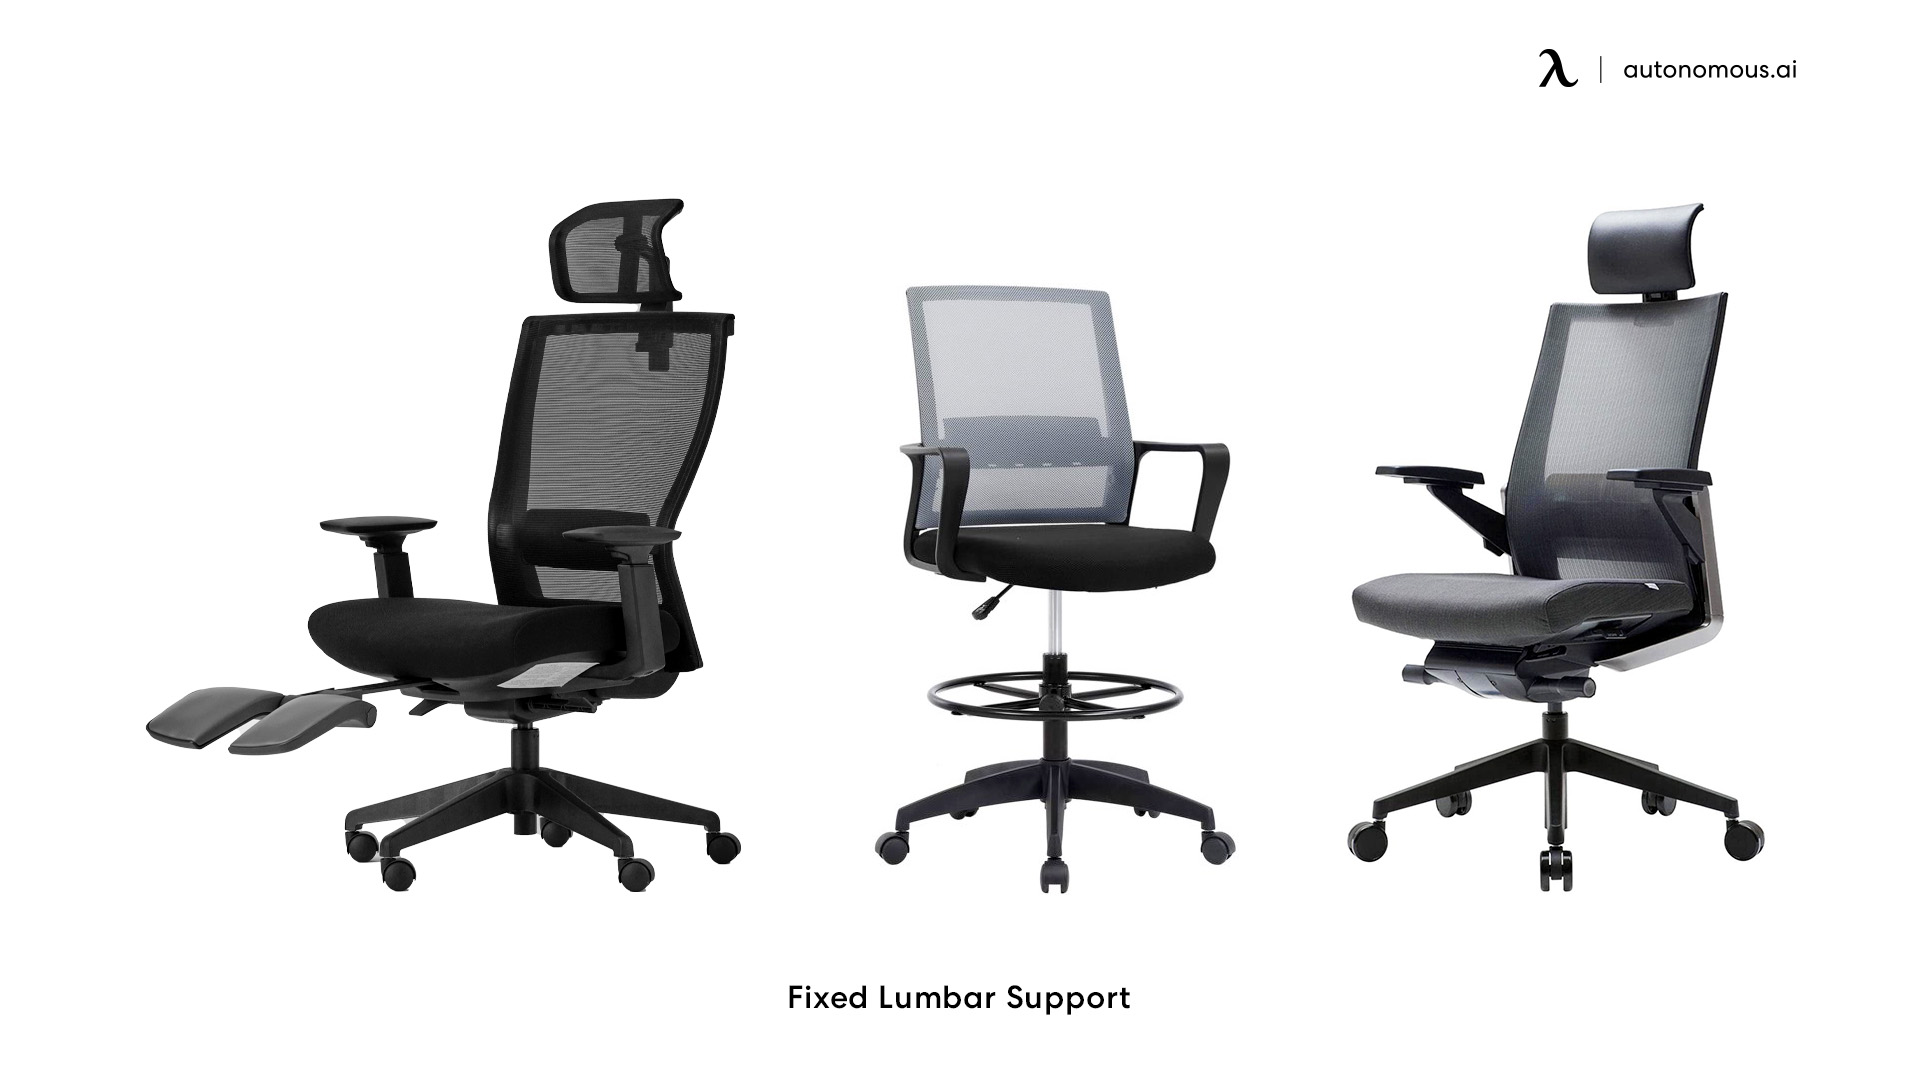 What is Lumbar Support?